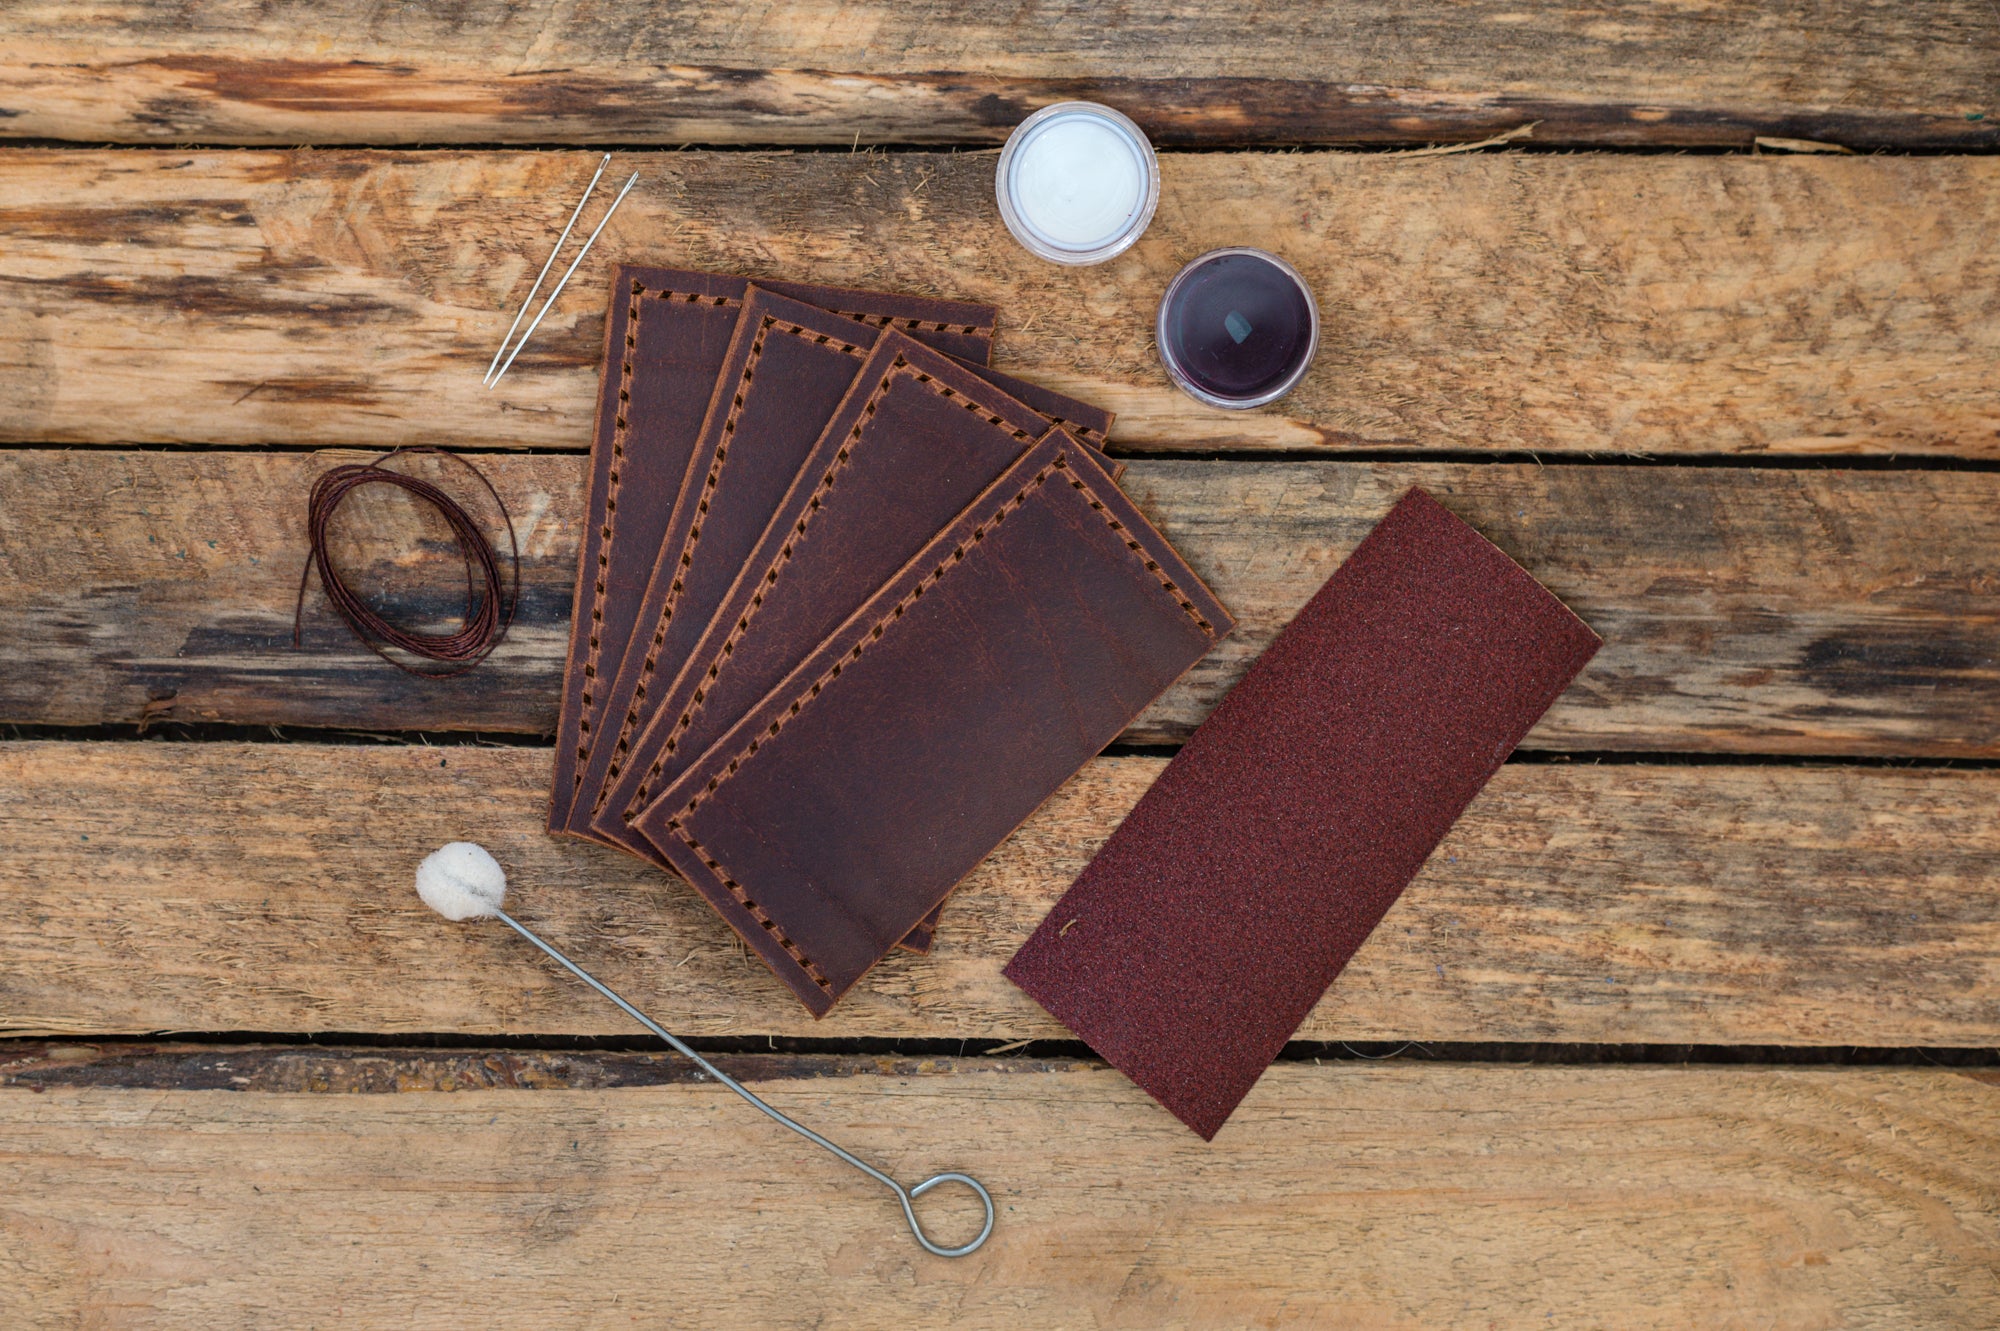 Introducing our first DIY Leather Craft Kit - J.H. Leather